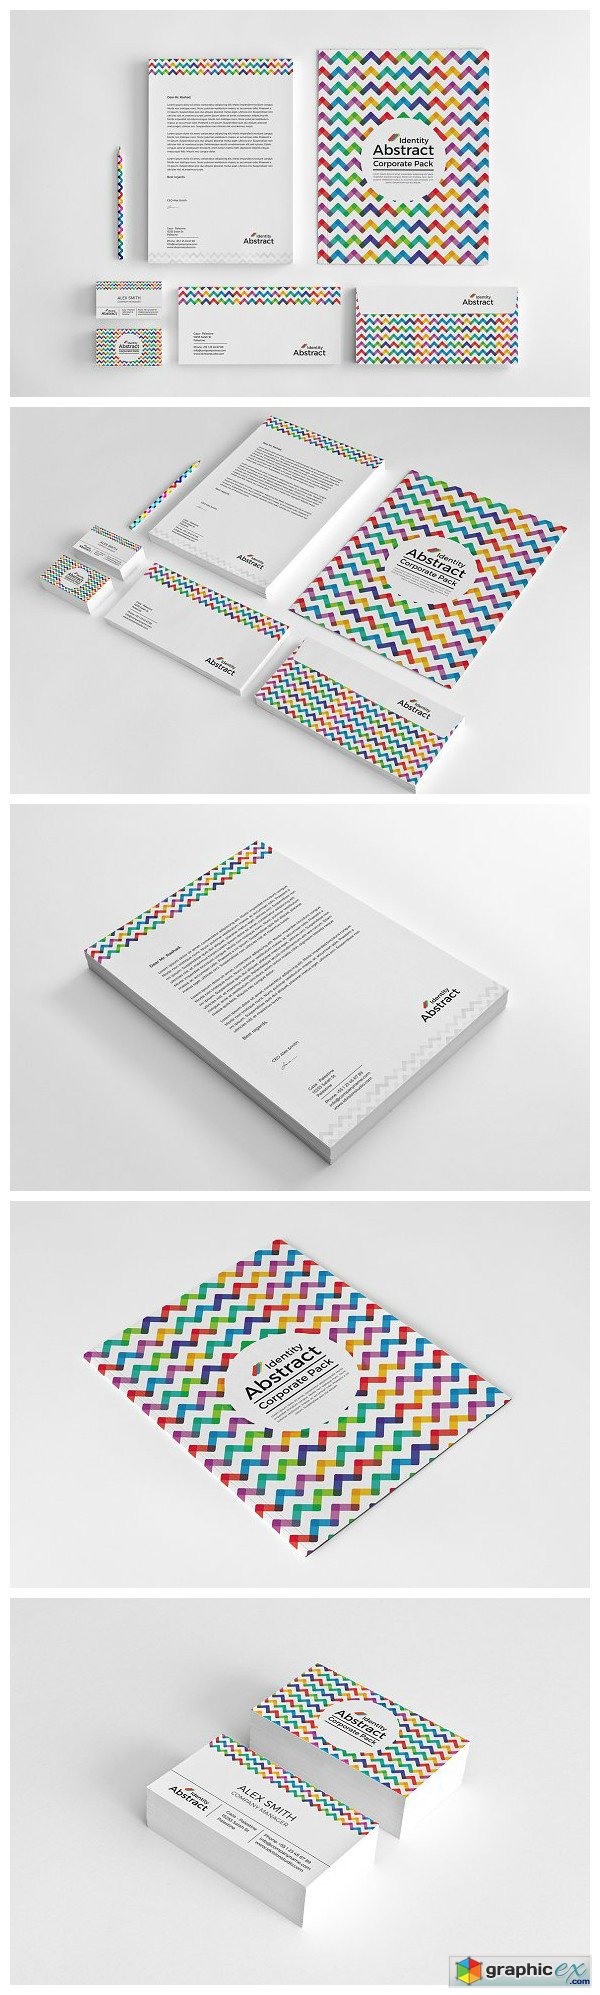 Stationery Pack Vol 02